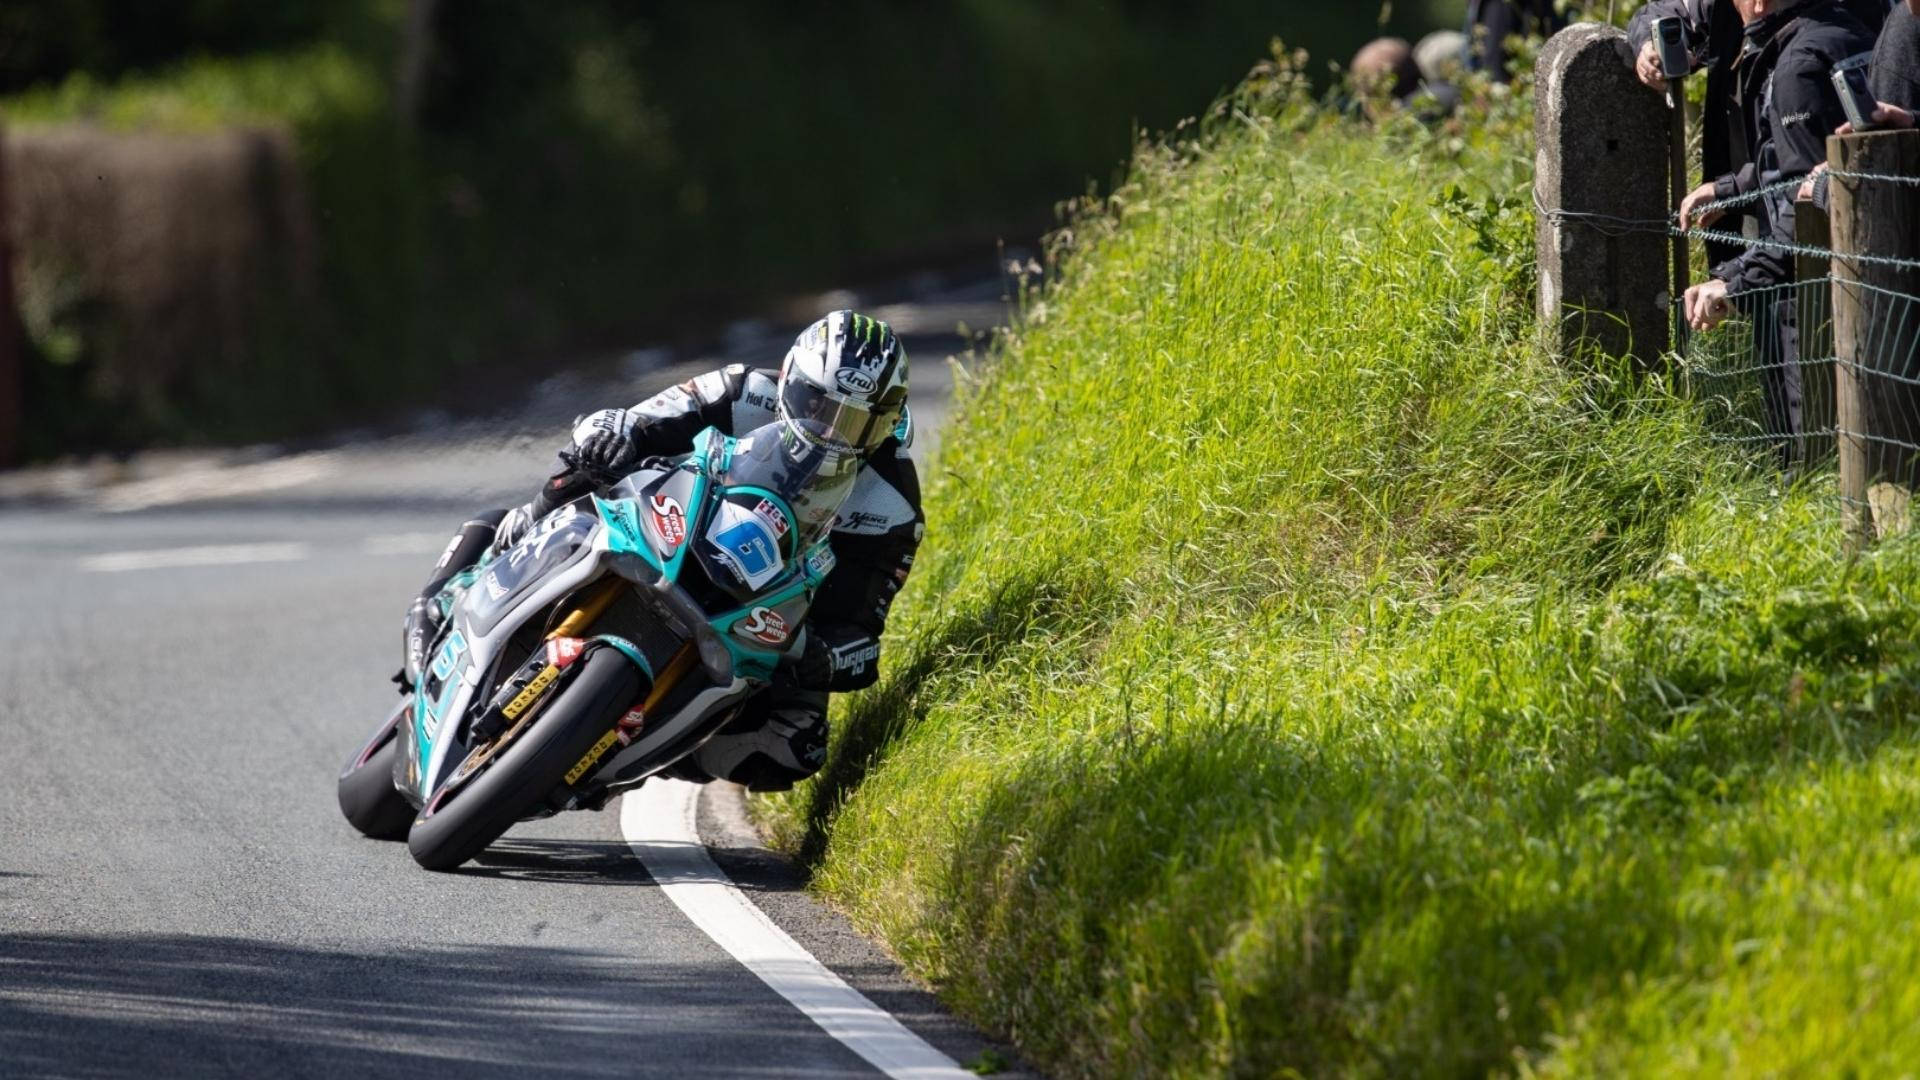 Thrilling Moments at the Isle of Mann Motorcycle Race Wallpaper